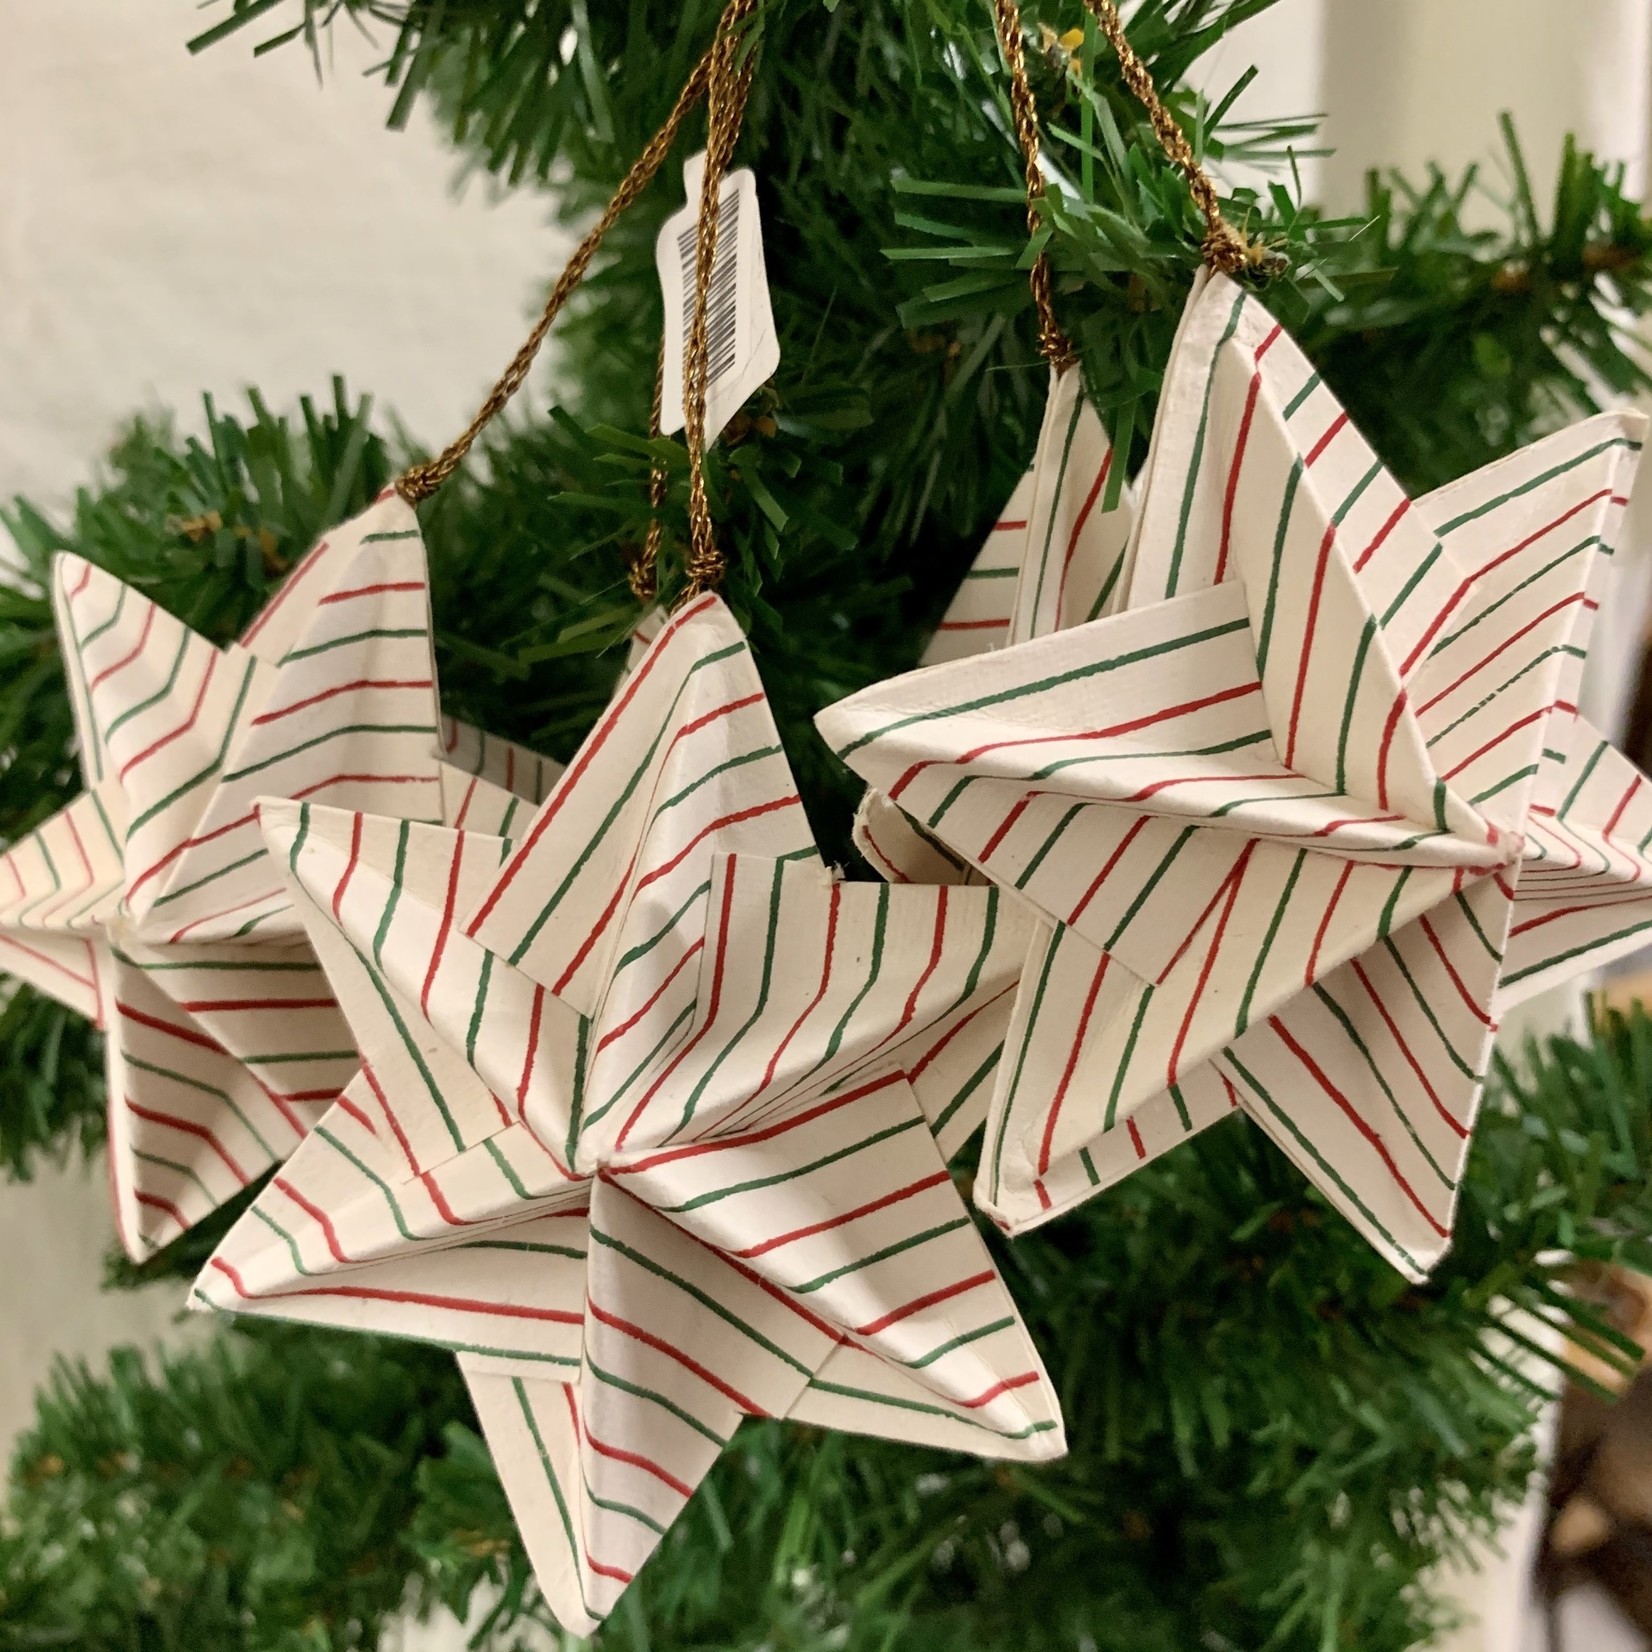 Origami Striped Star Ornaments (set of 5)